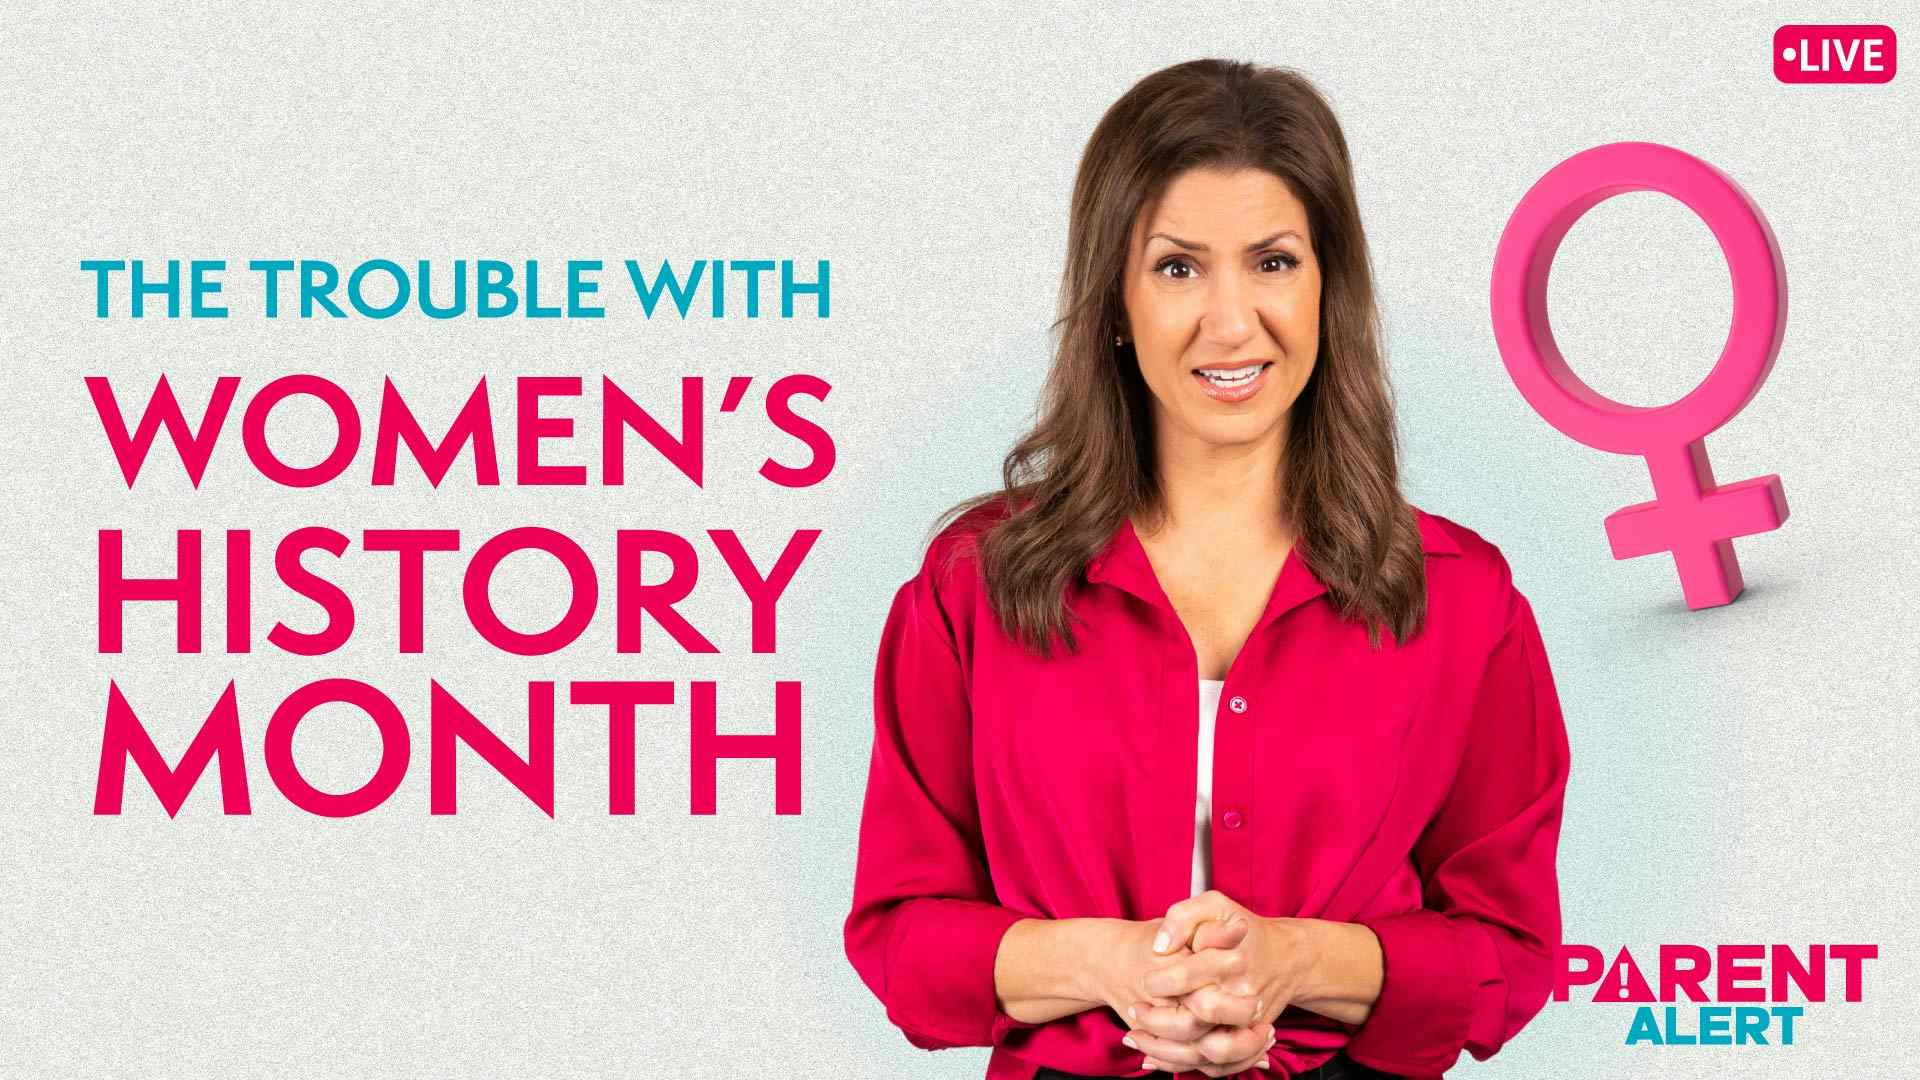 Parent Alert: The Trouble with Women's History Month